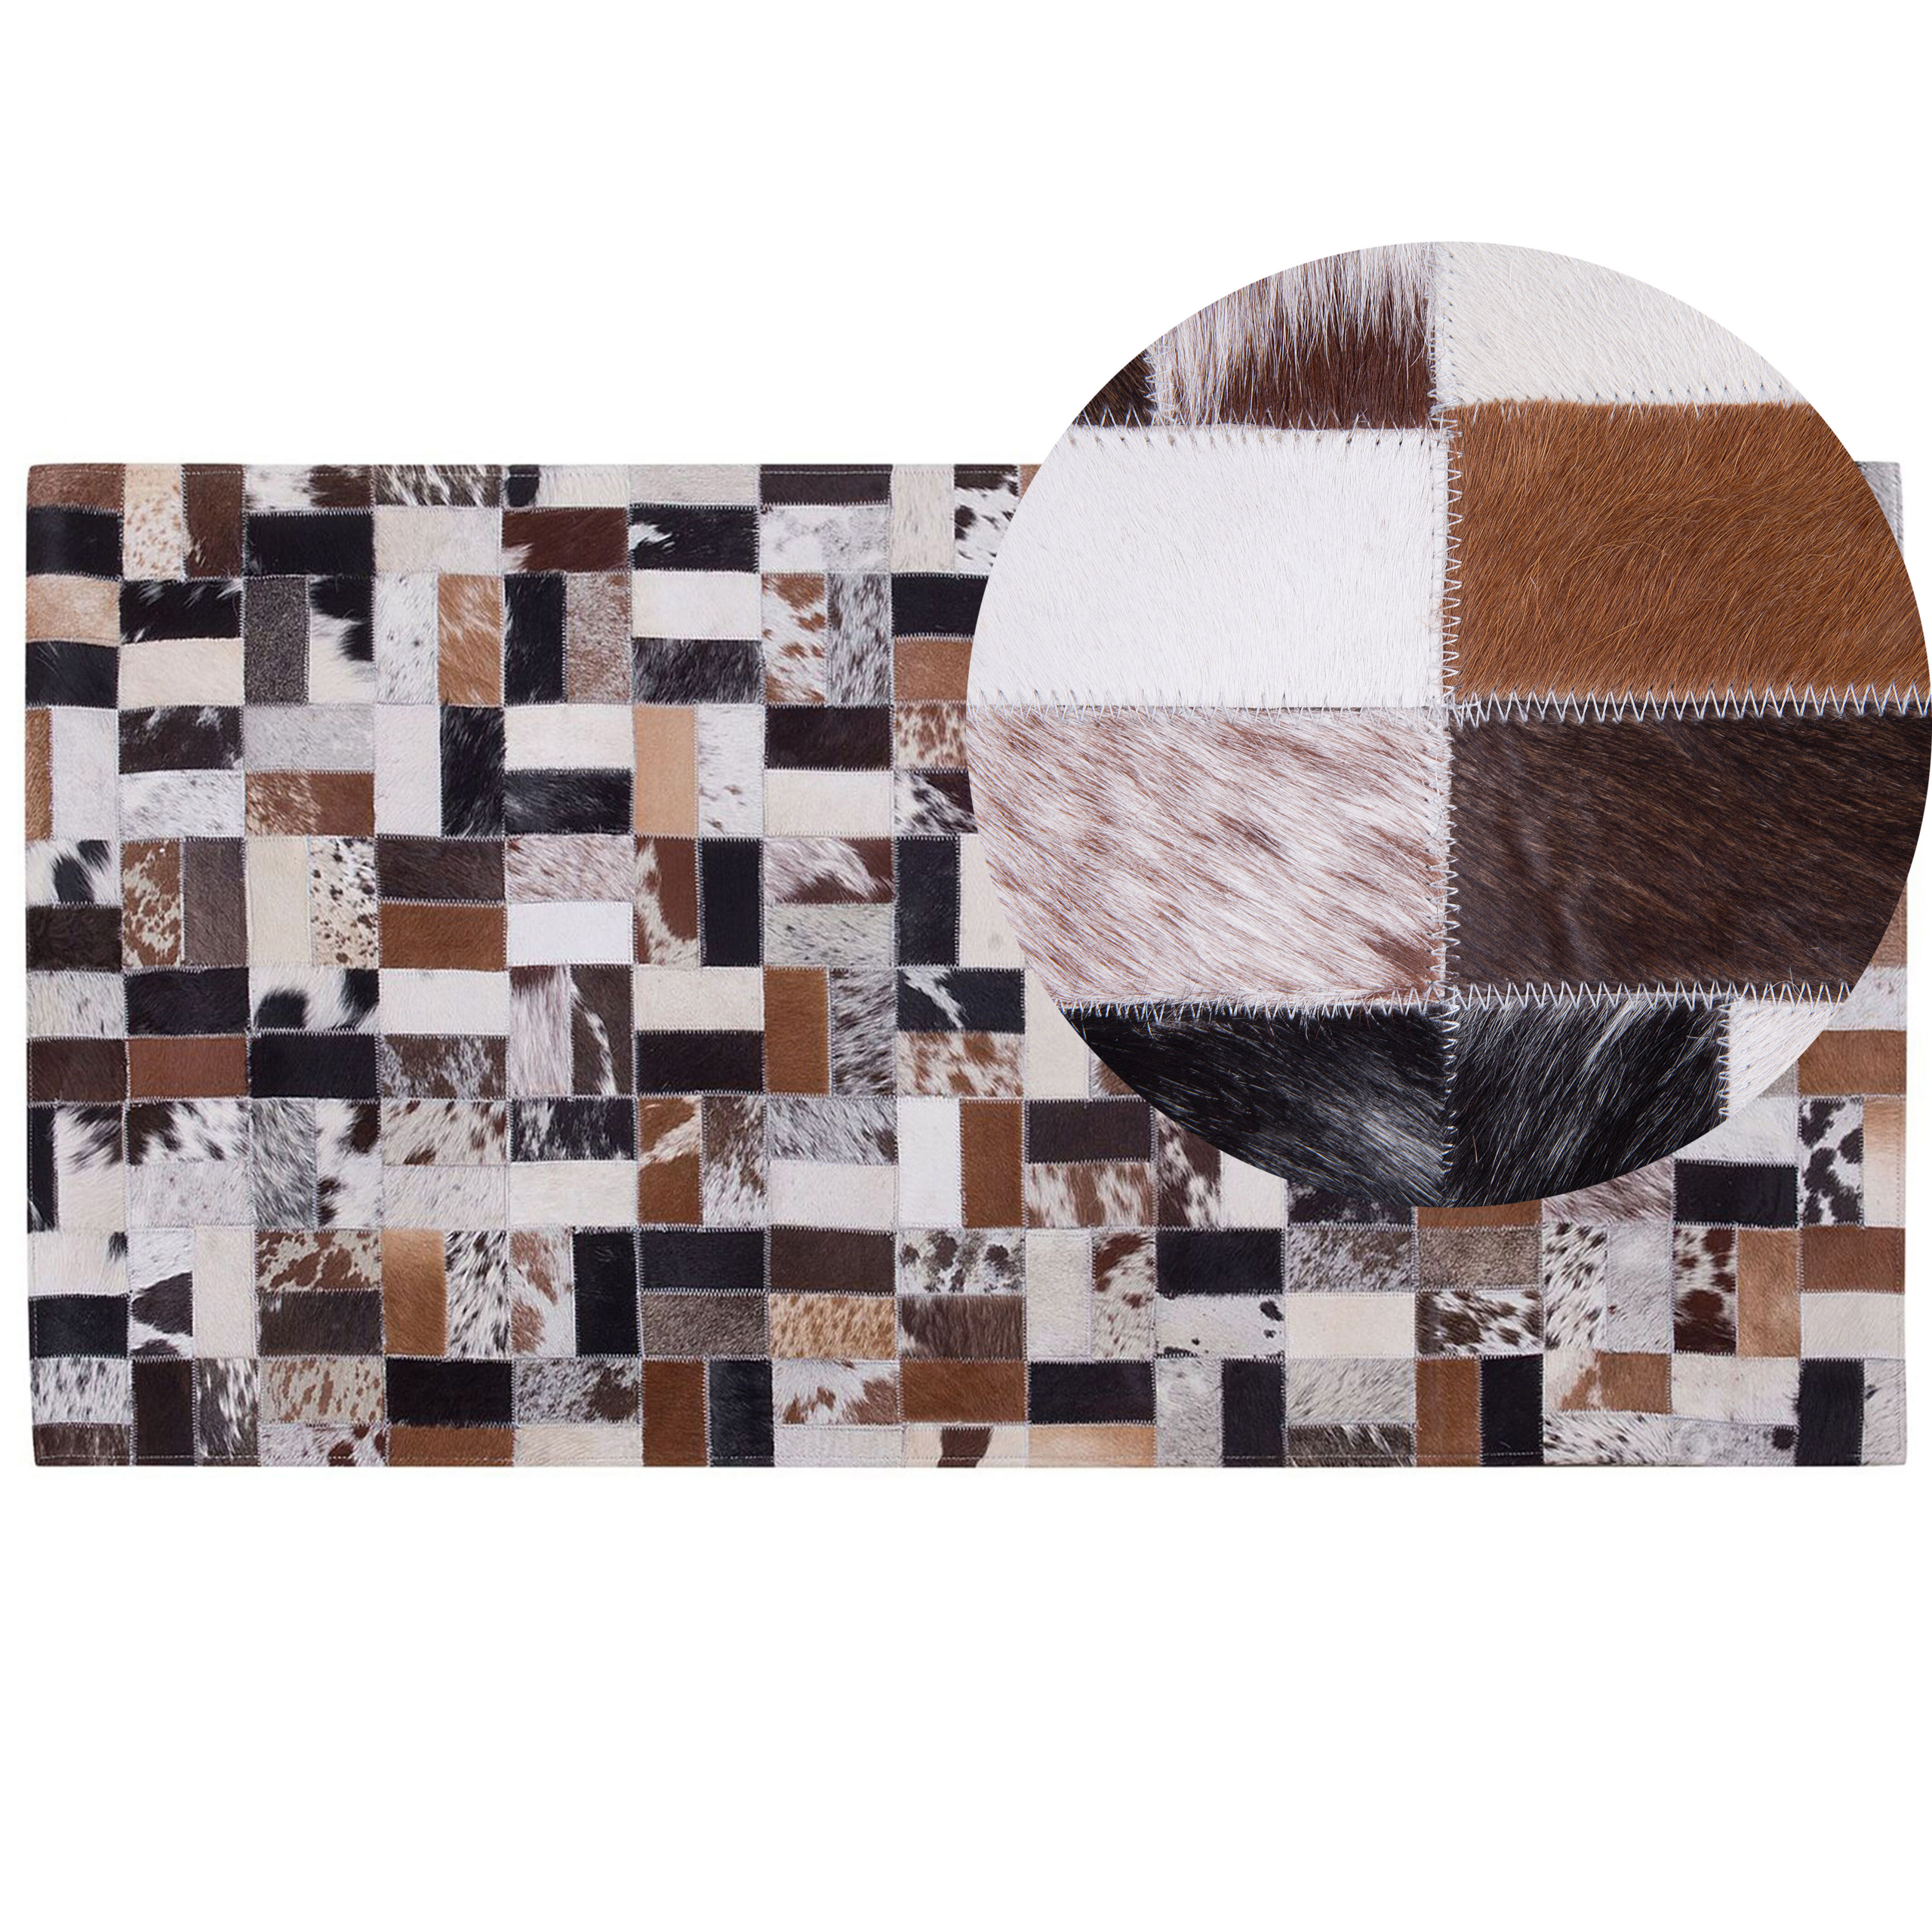 Beliani Area Rug Brown and Beige Cowhide Leather 80 x 150 cm Rectangular Patchwork Handcrafted